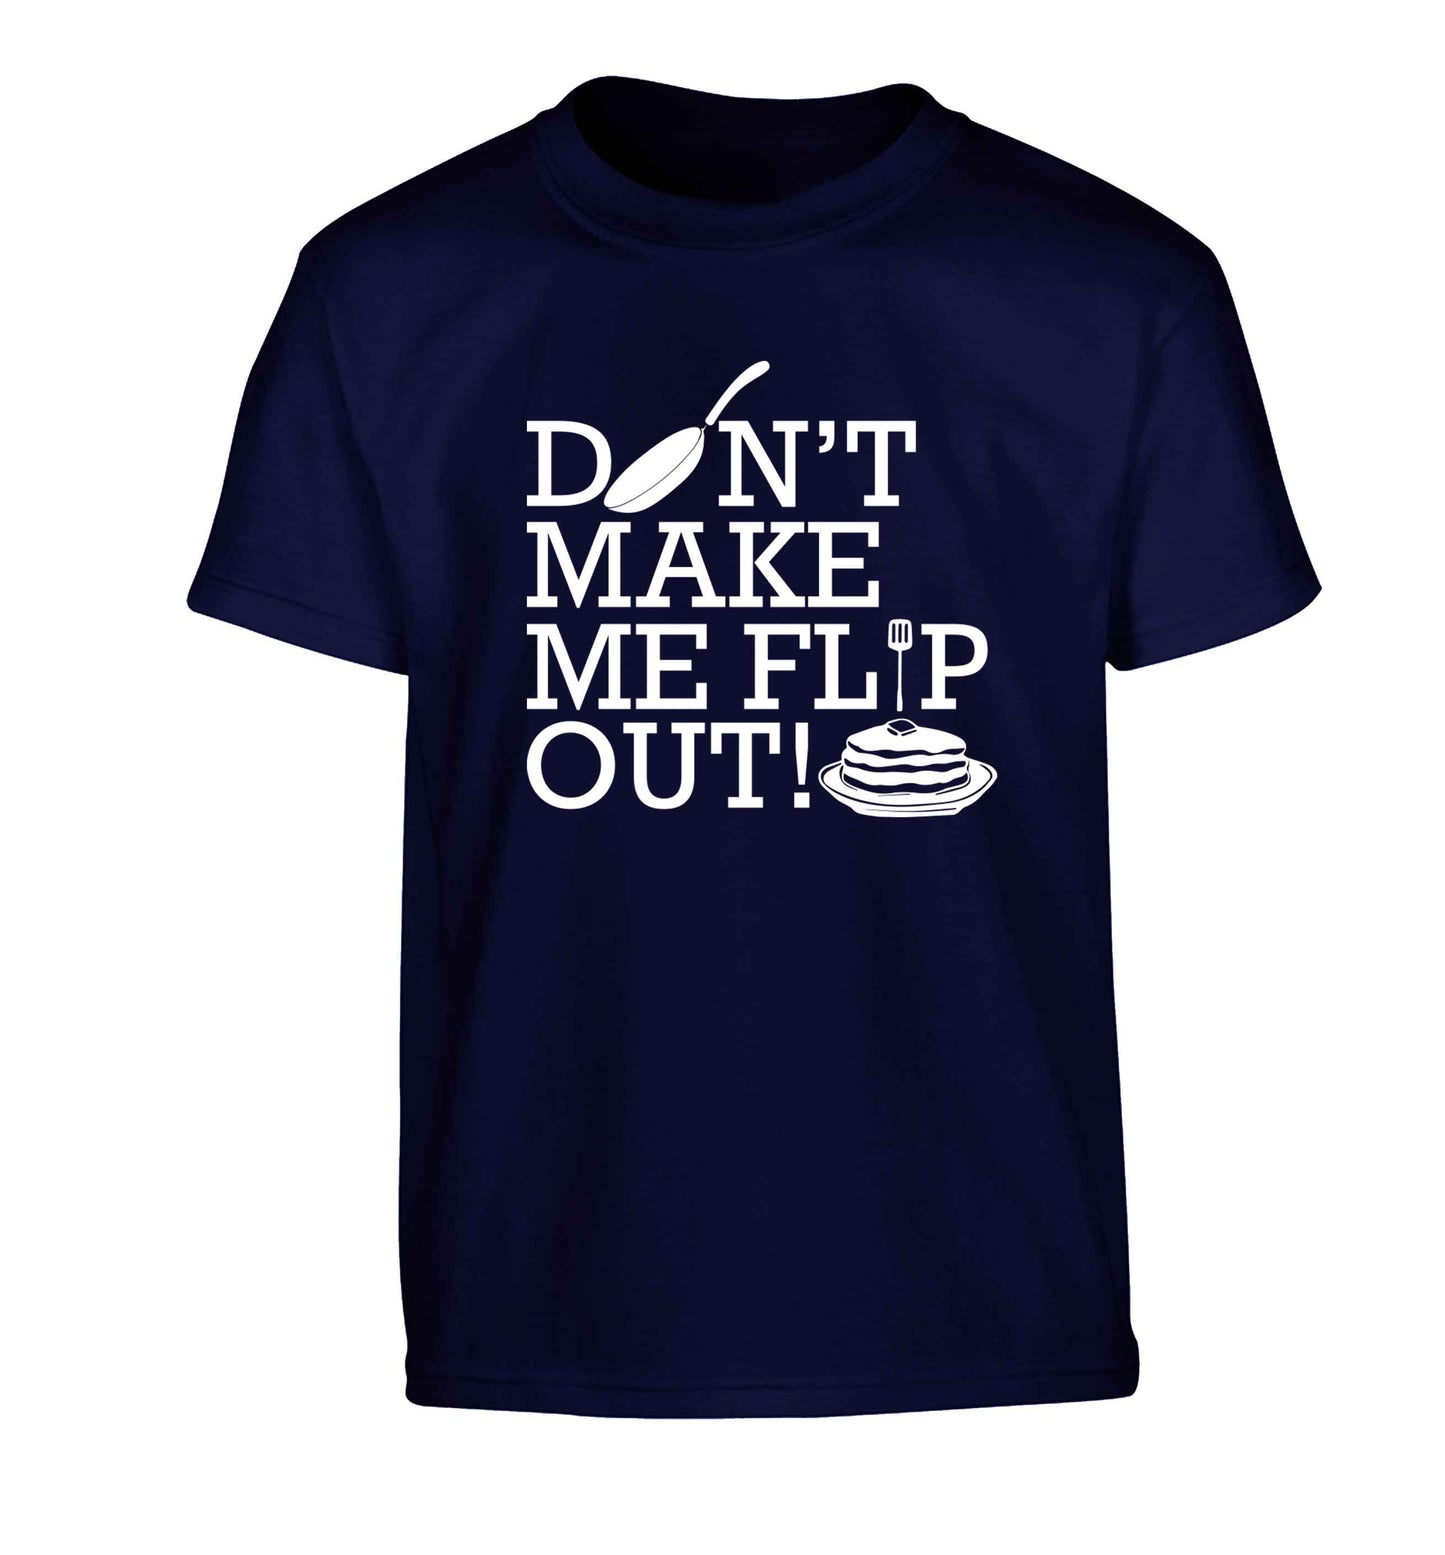 Don't make me flip out Children's navy Tshirt 12-13 Years